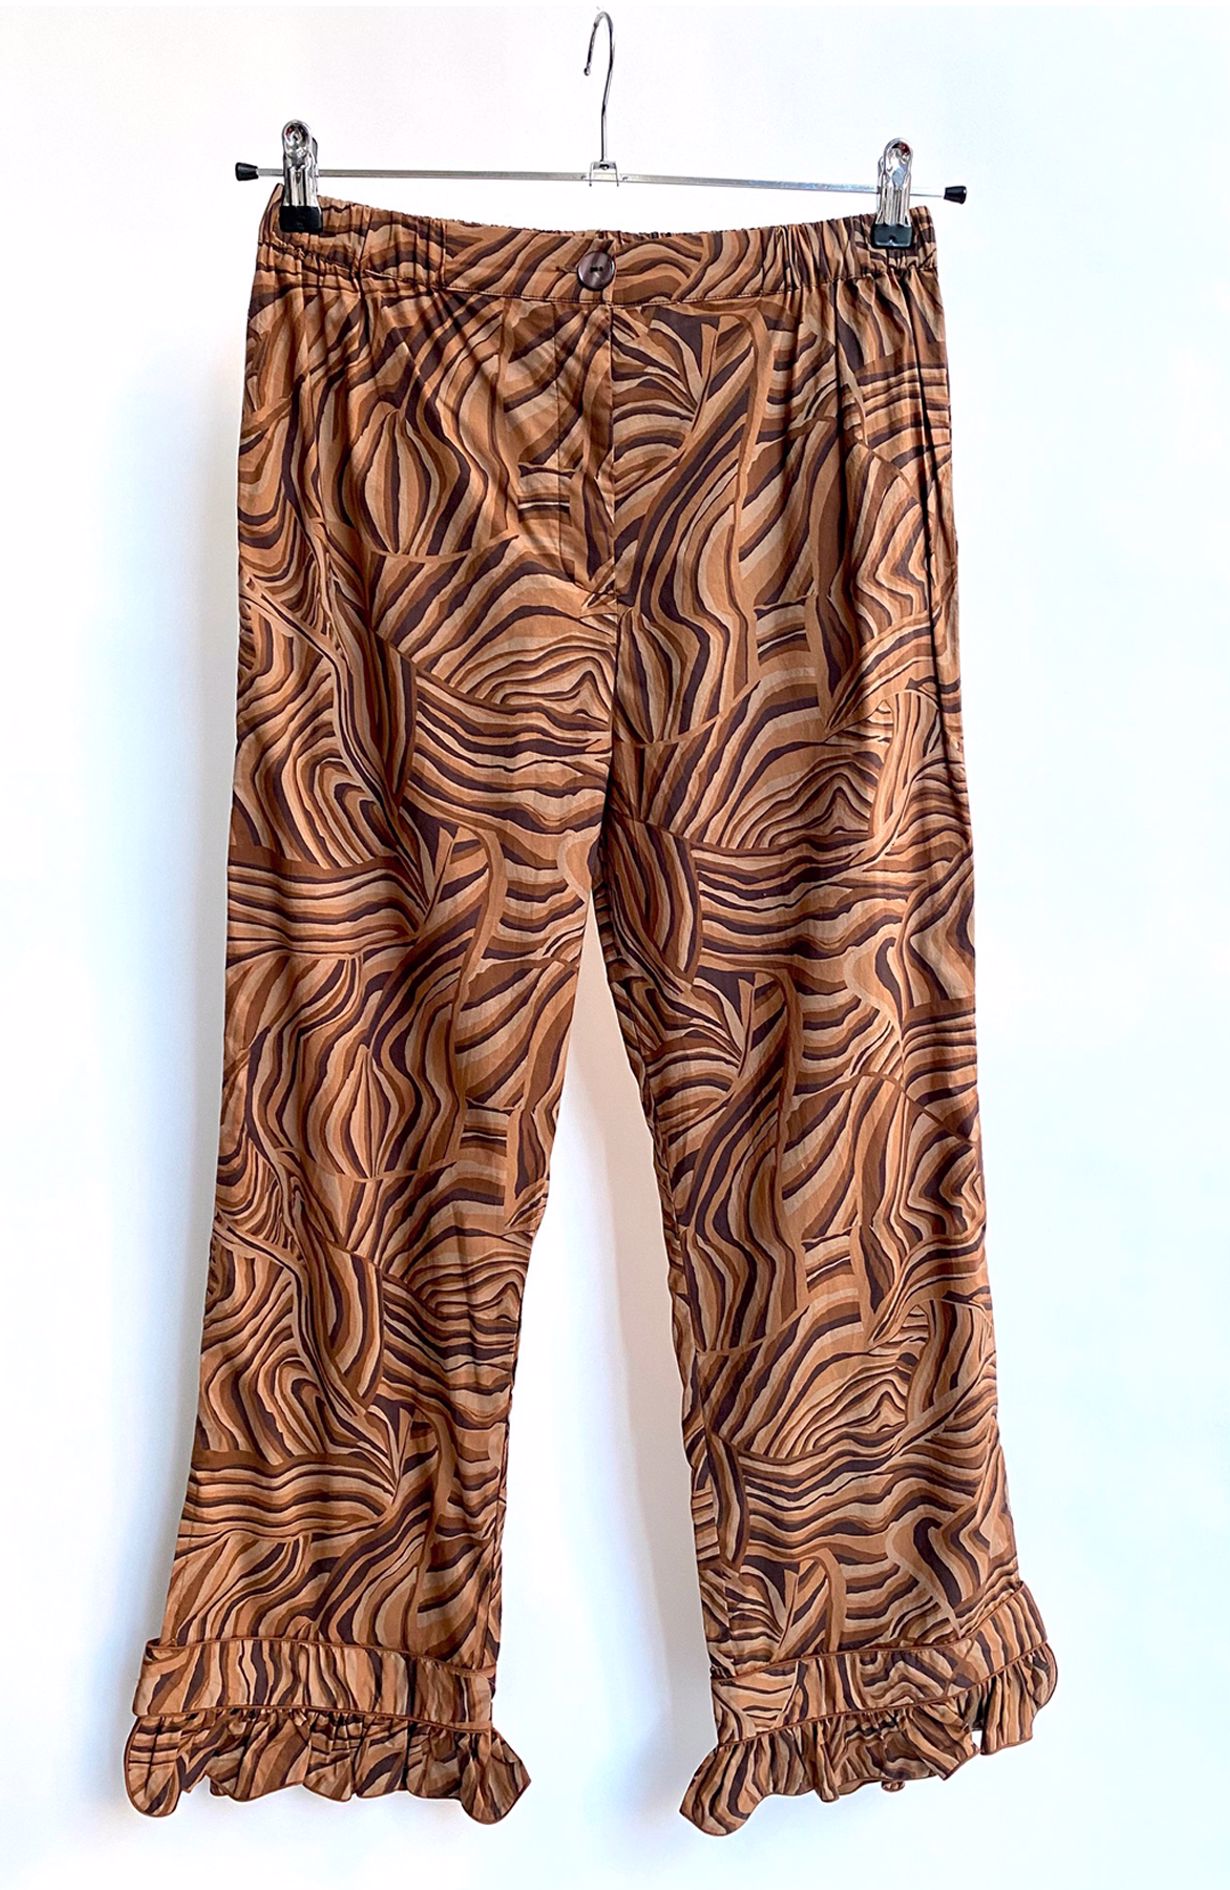 Helmstedt Pants - Size S/M 